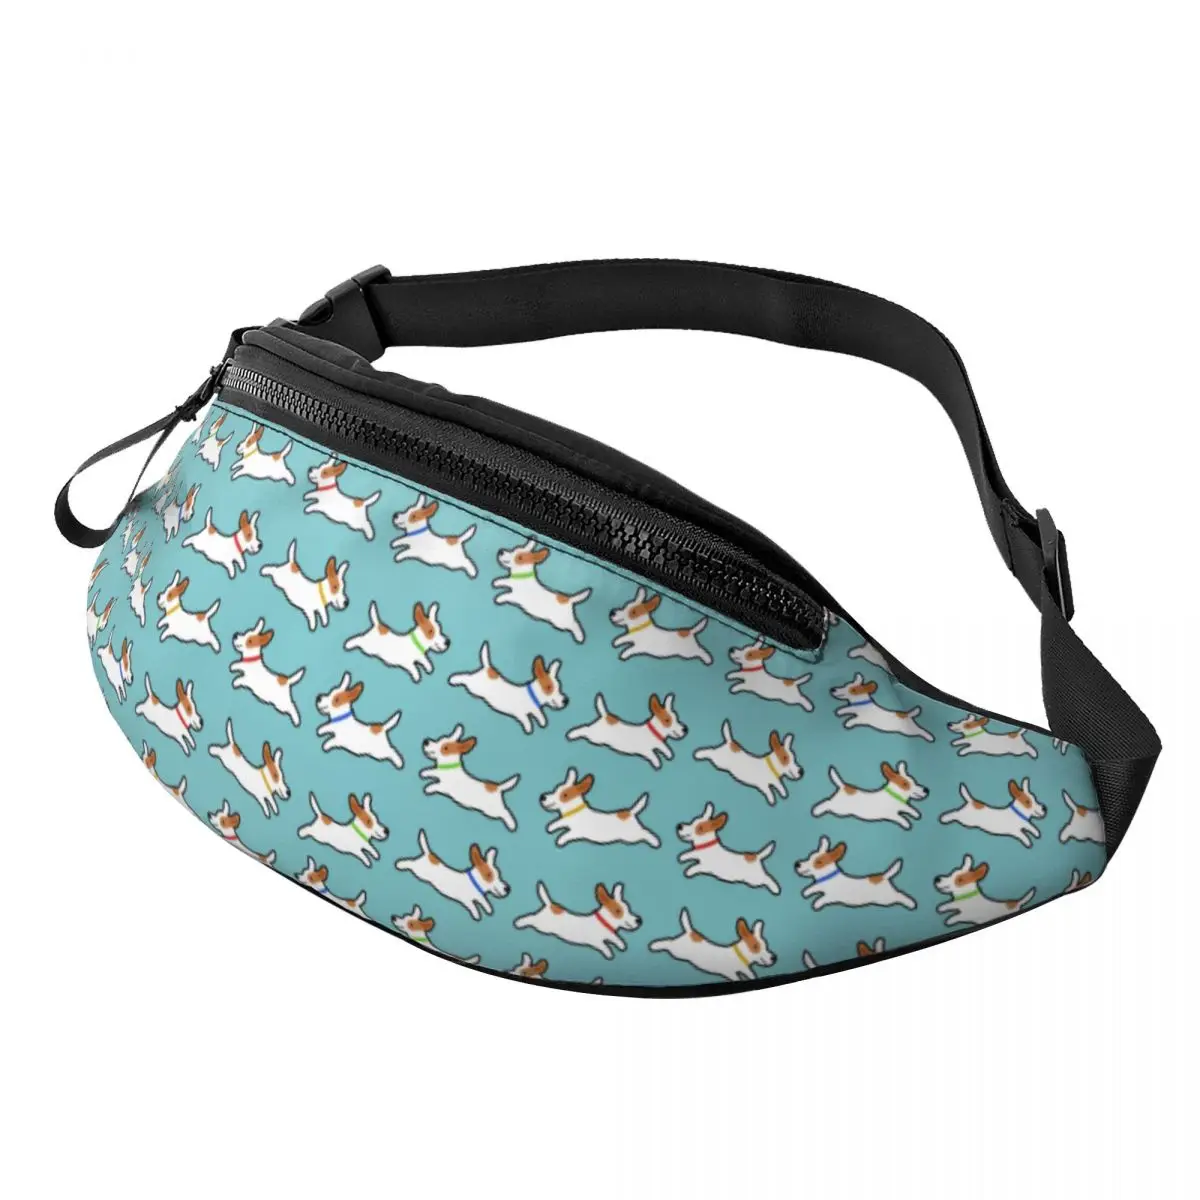 

Cute Jack Russell Terrier Running Dog Fanny Pack for Men Women Fashion Crossbody Waist Bag Cycling Camping Phone Money Pouch